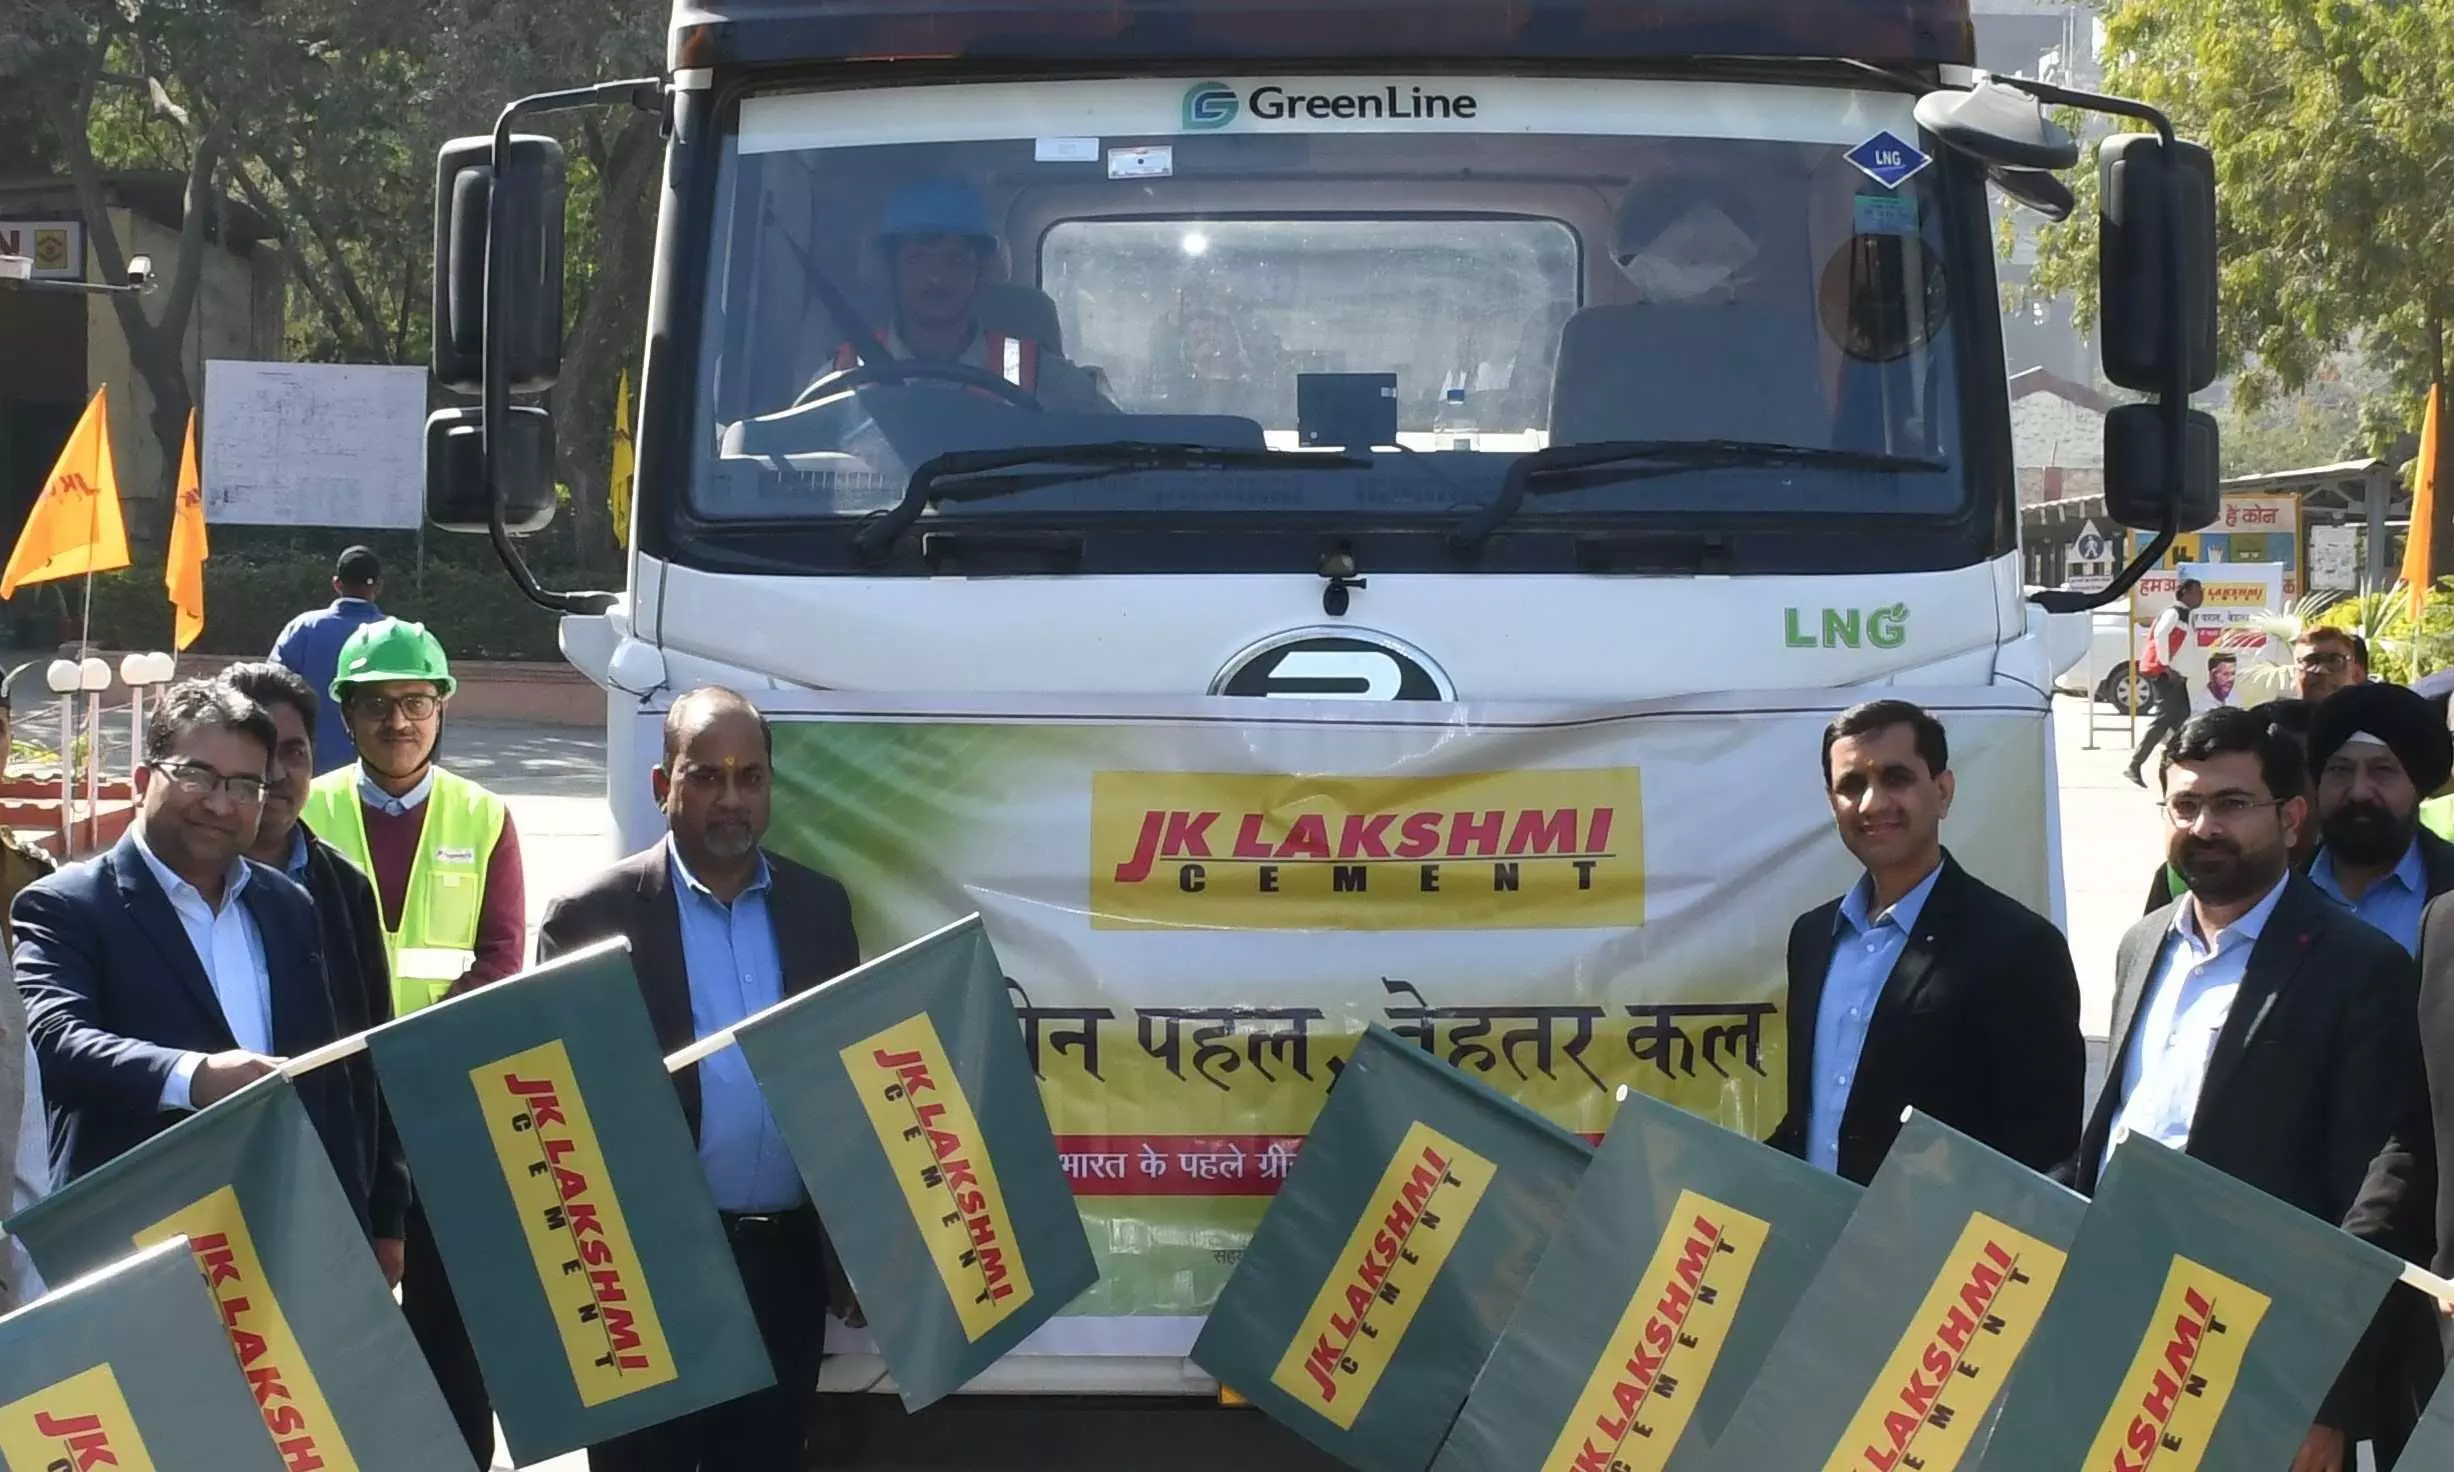 JK Lakshmi Cement ties up with GreenLine Logistics to roll out first LNG fleet in India